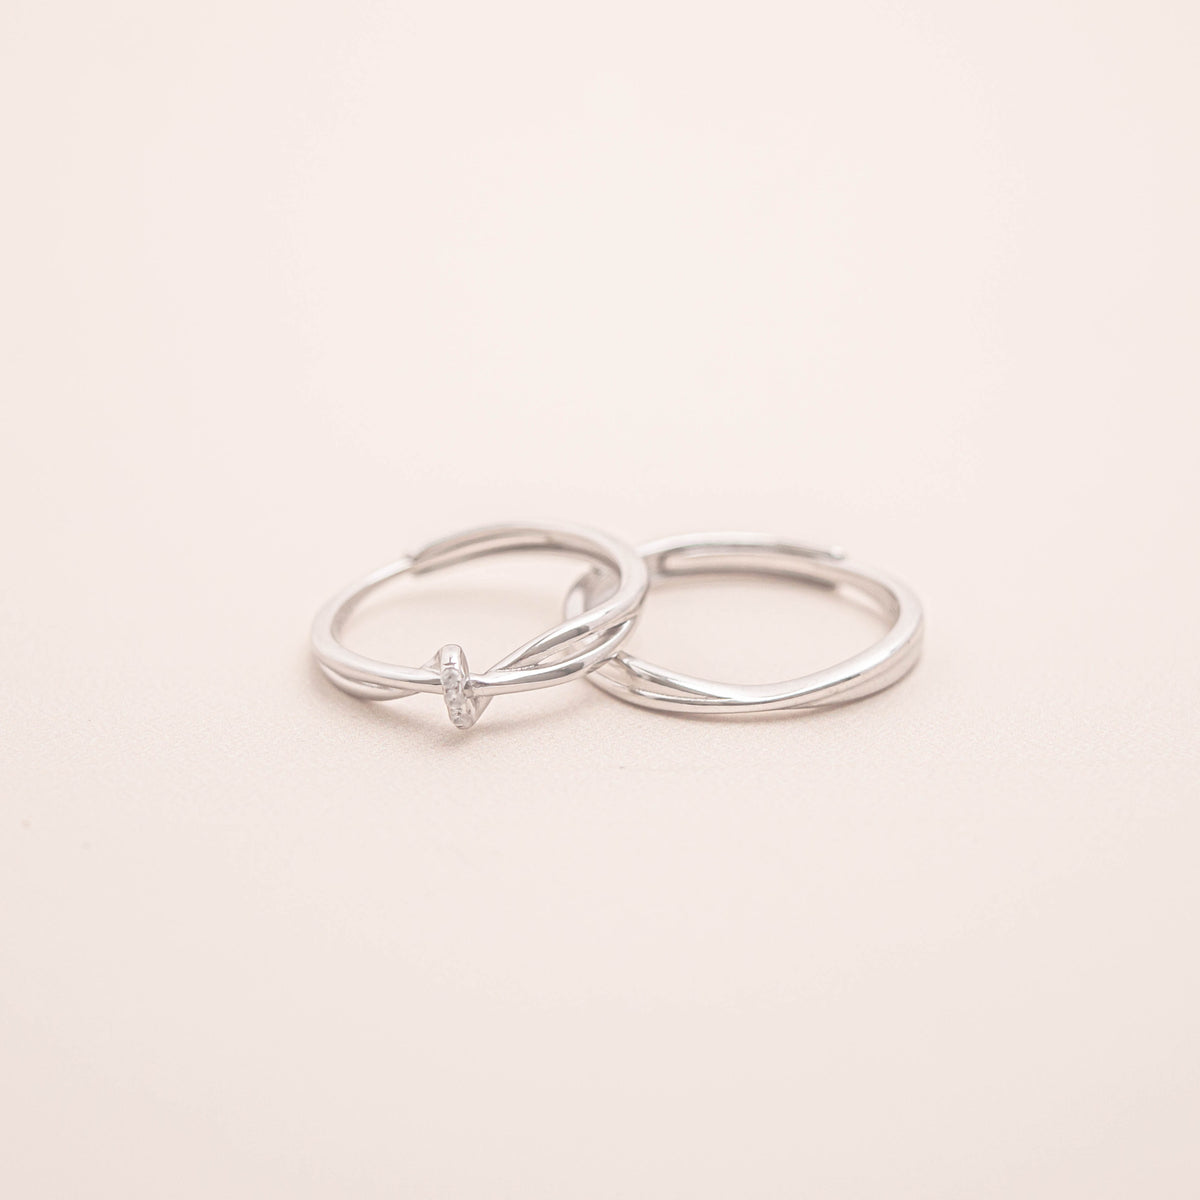 Tied Knots Couple Ring